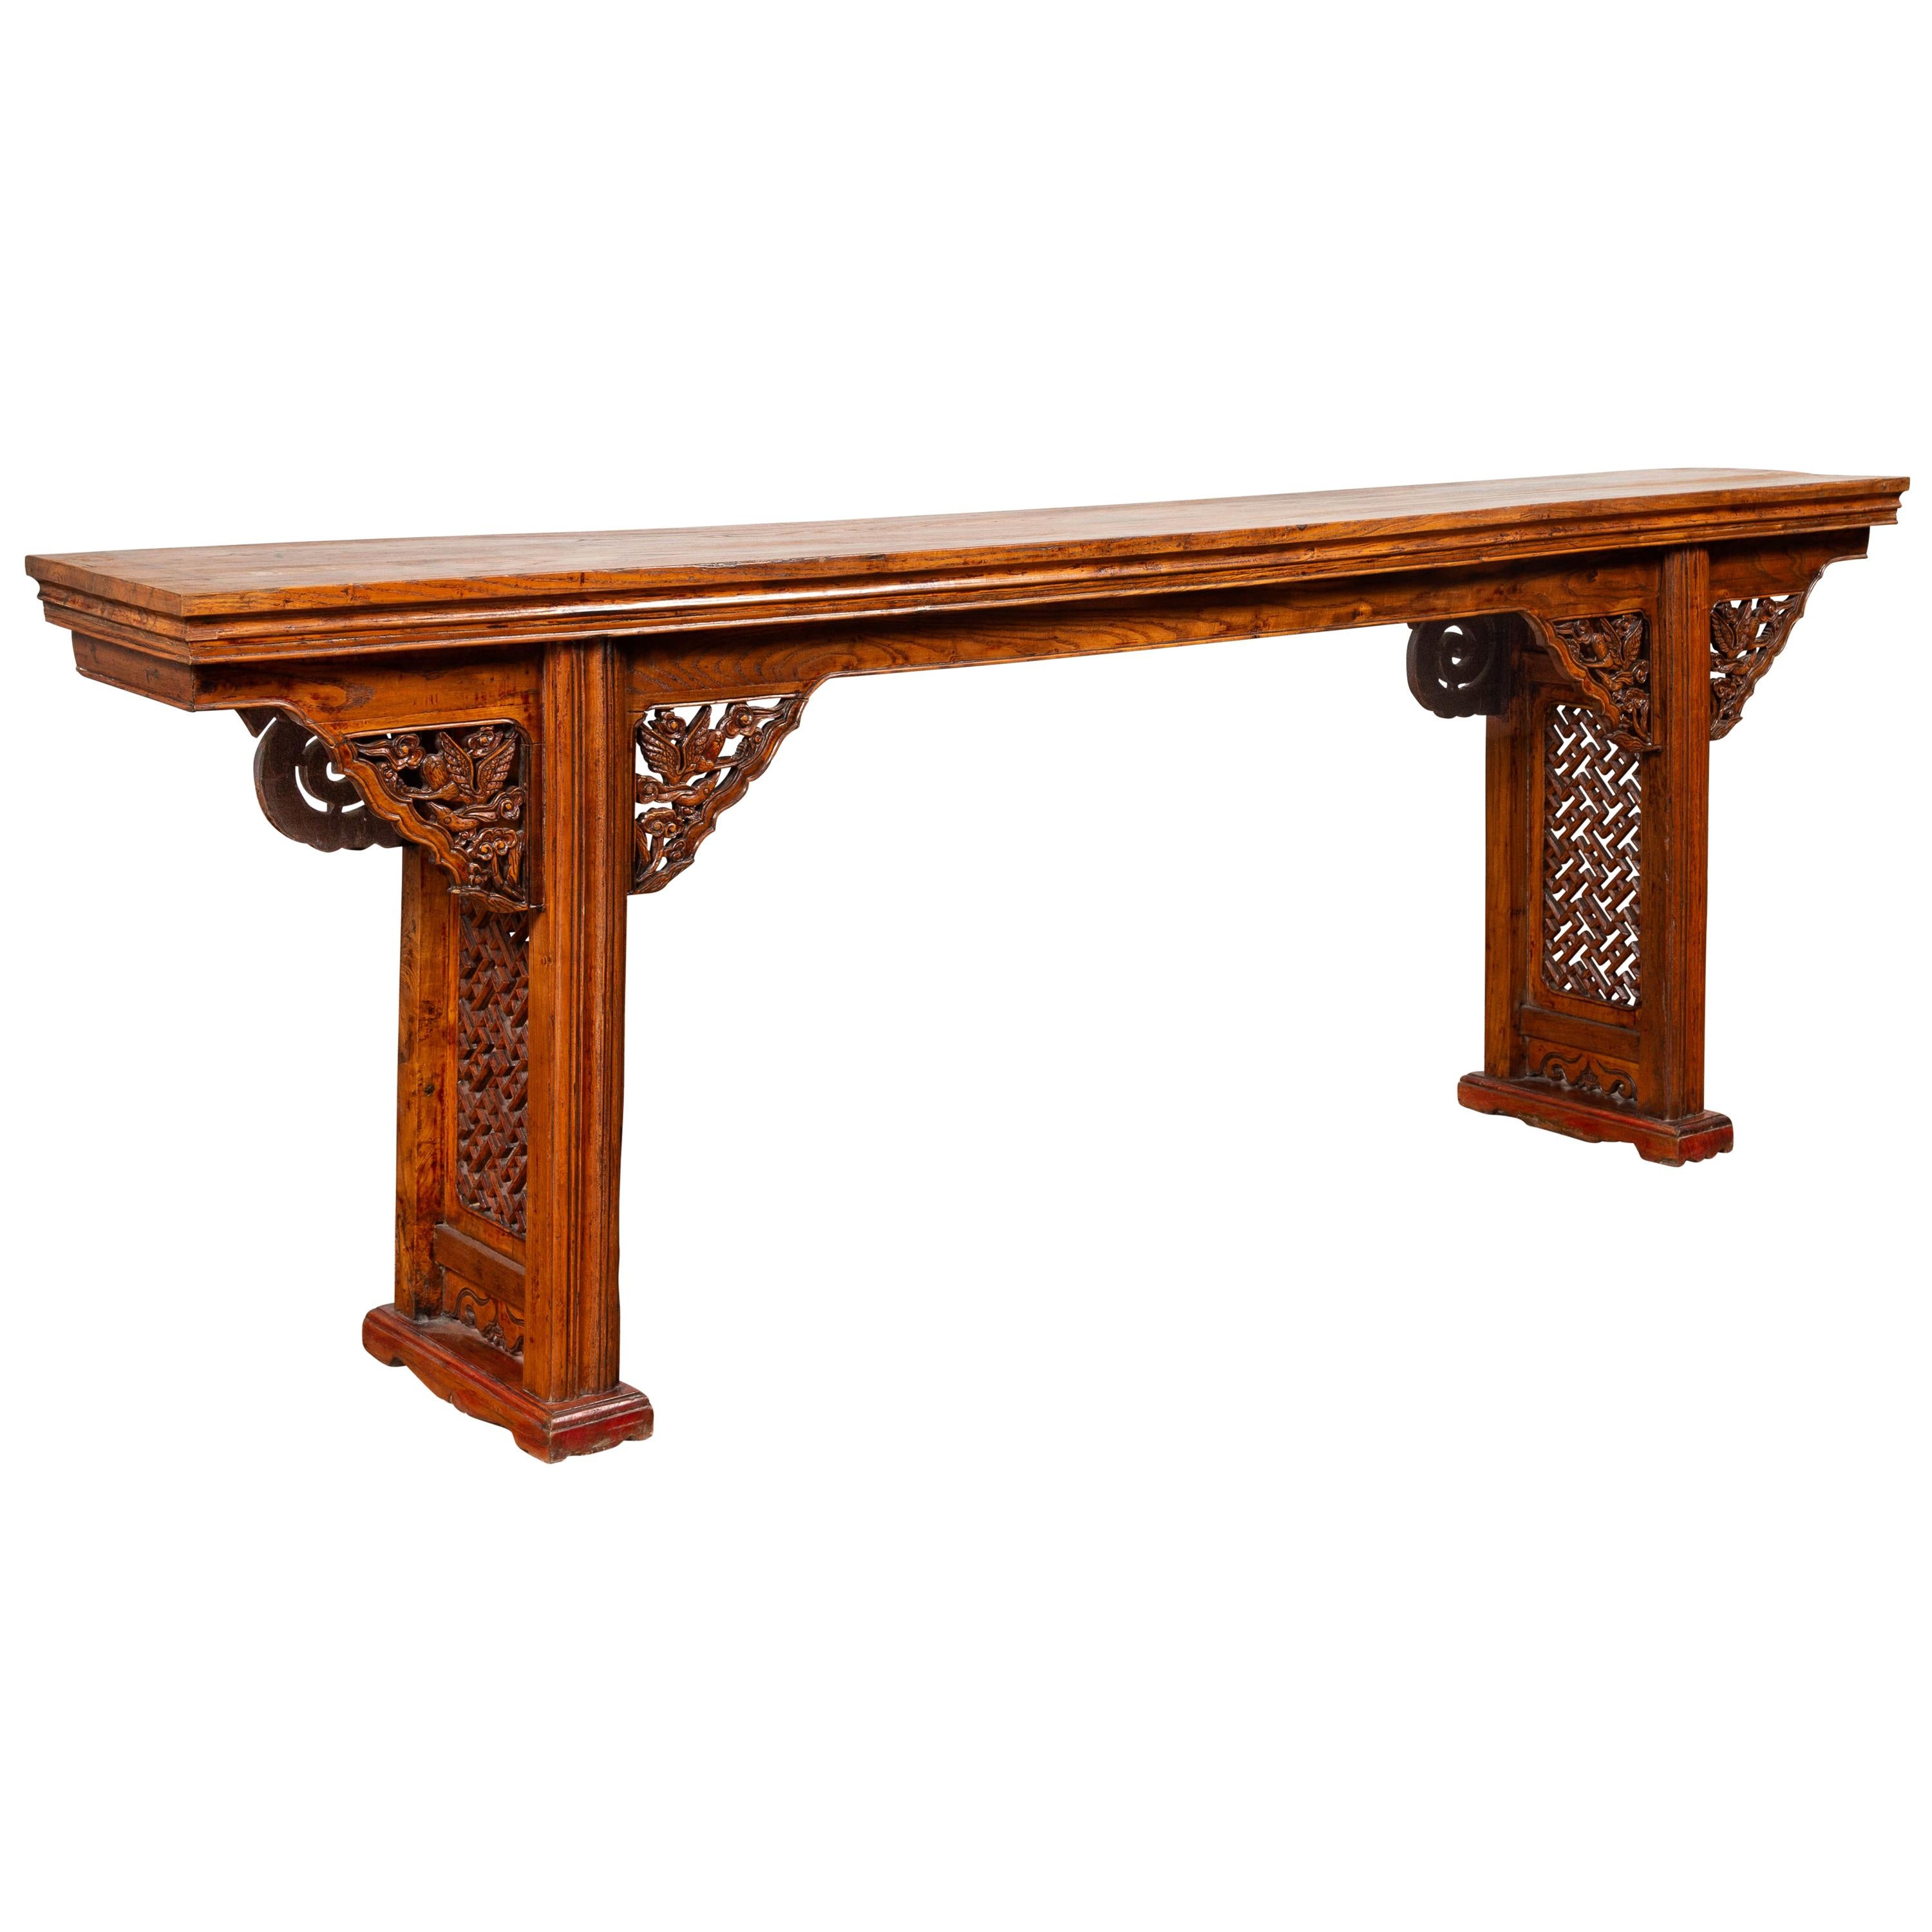 Chinese Ming Style Altar Console Table with Bird-Carved Spandrels and Fretwork